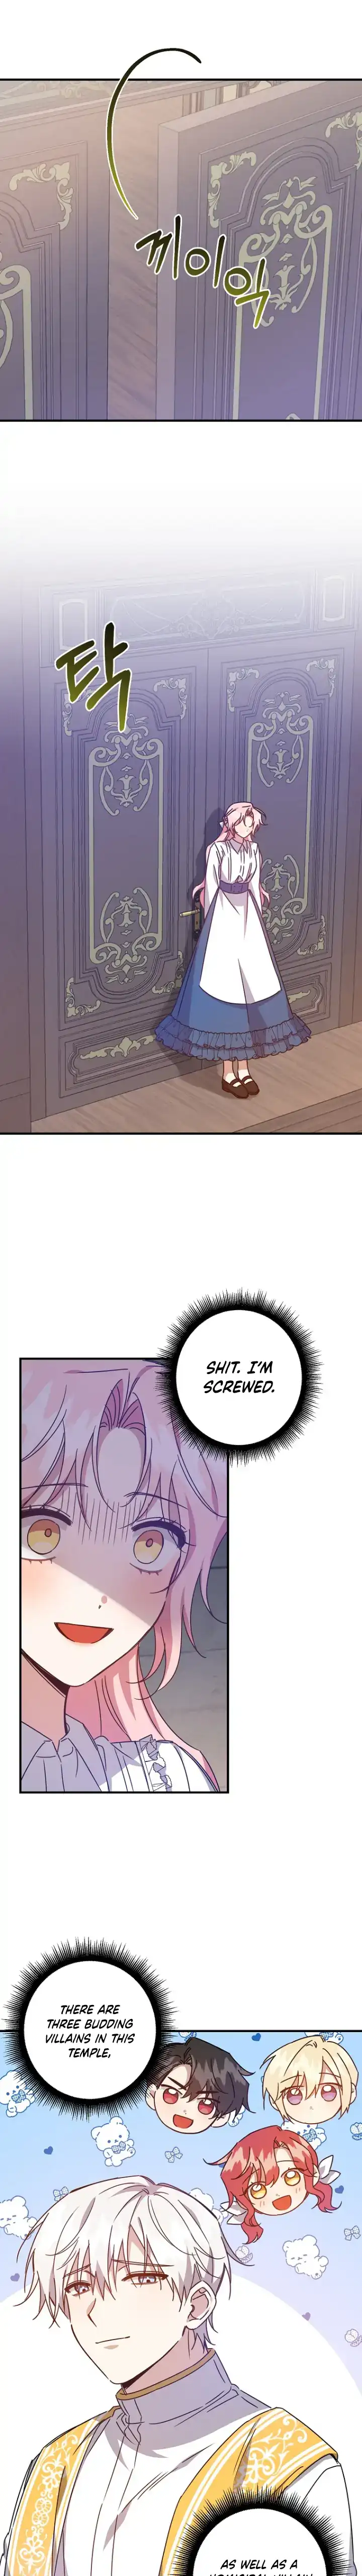 I Raised the Villains Preciously Chapter 16 - page 1